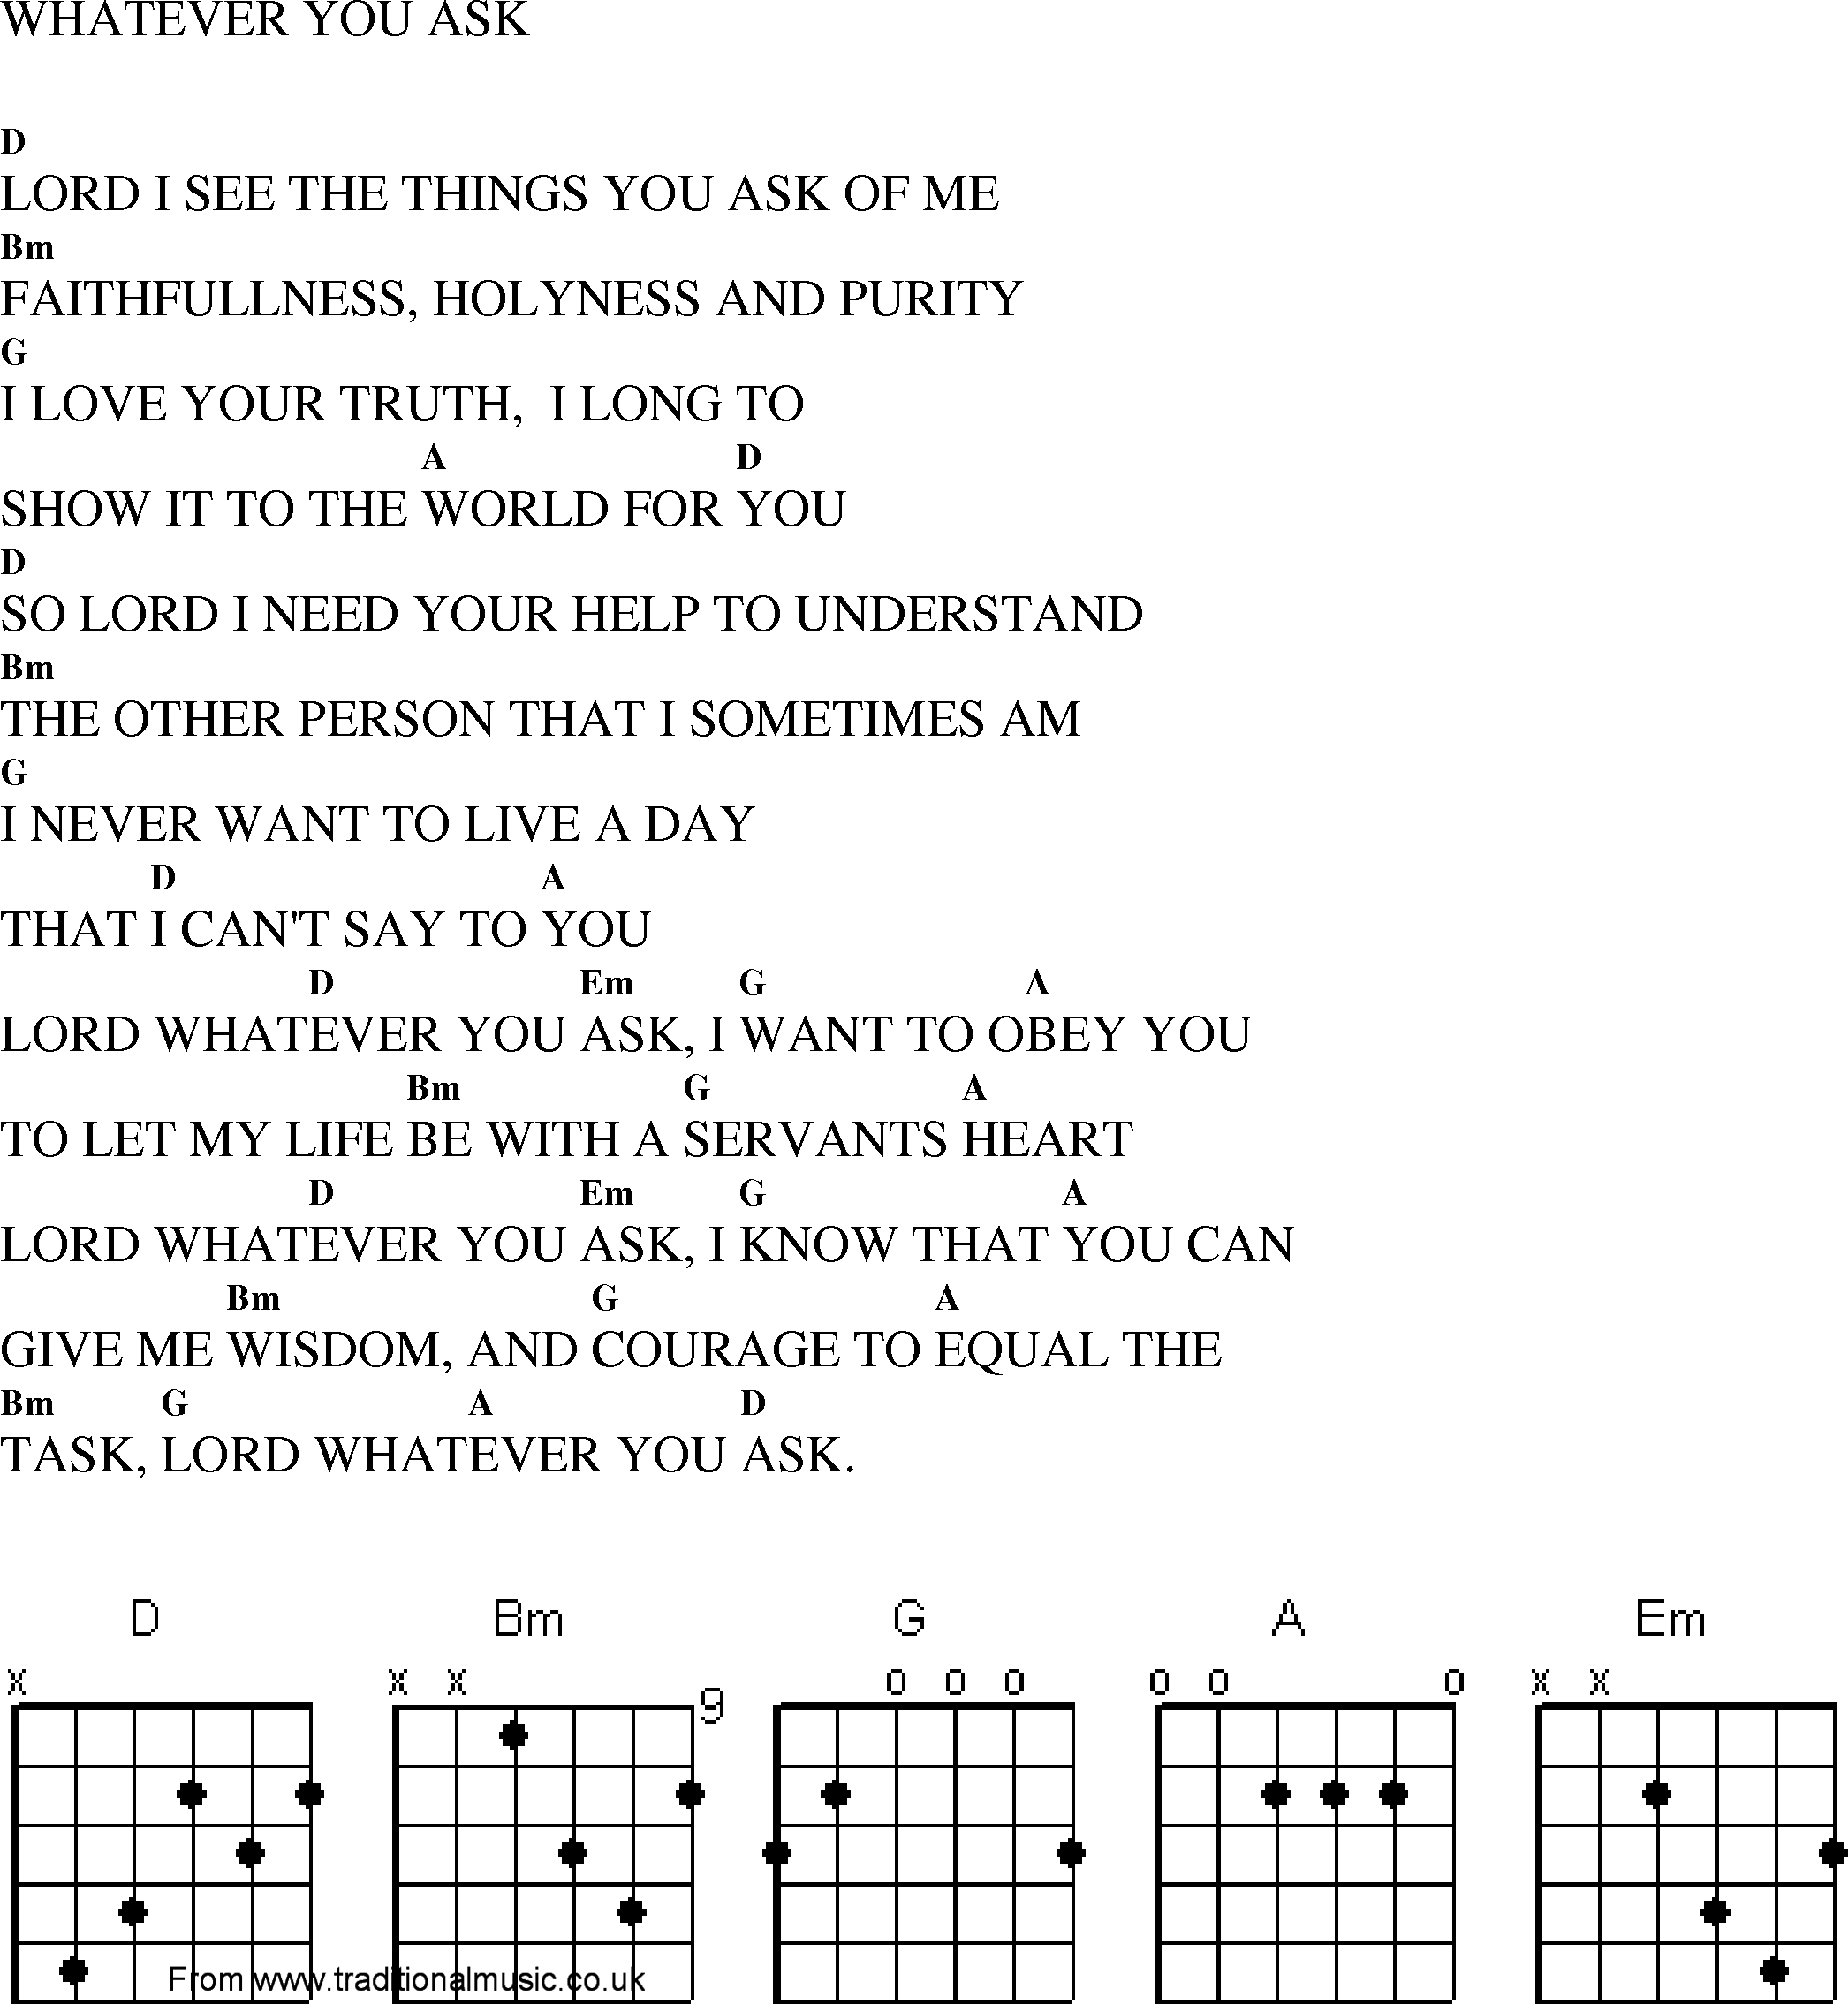 Gospel Song: whatever_you_ask, lyrics and chords.